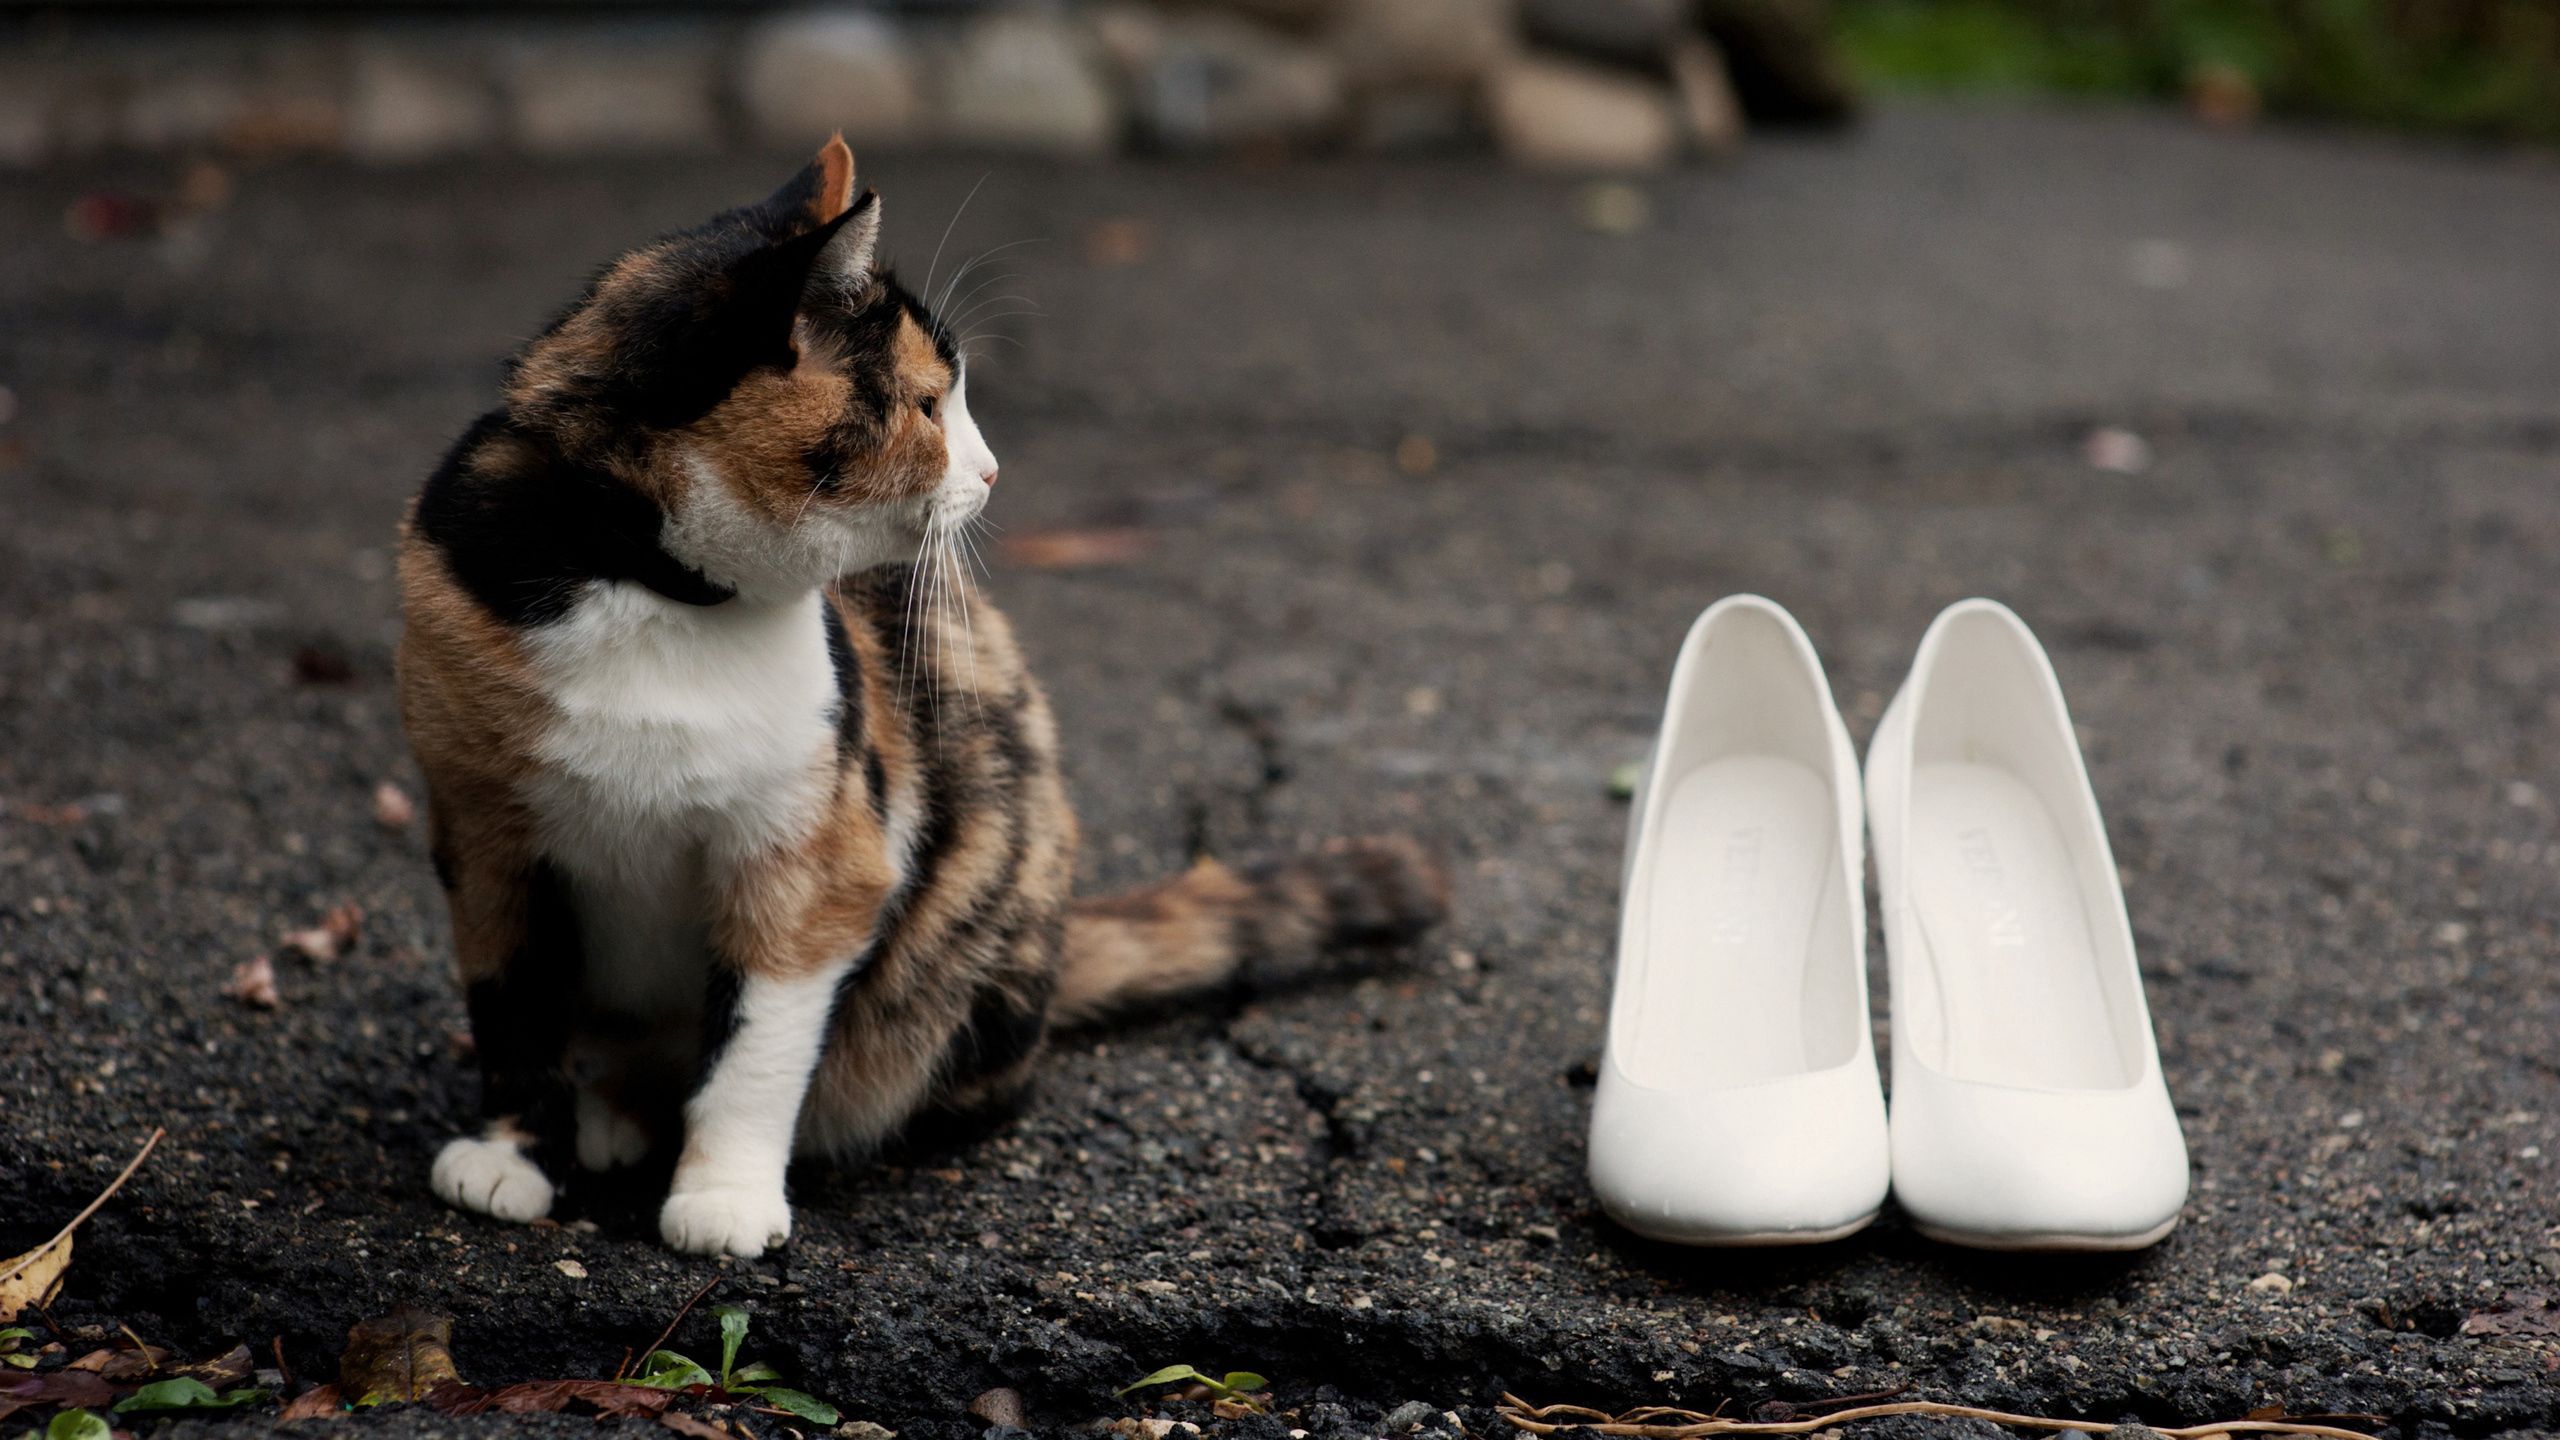 vertical wallpaper spotted, animals, road, cat, spotty, shoes